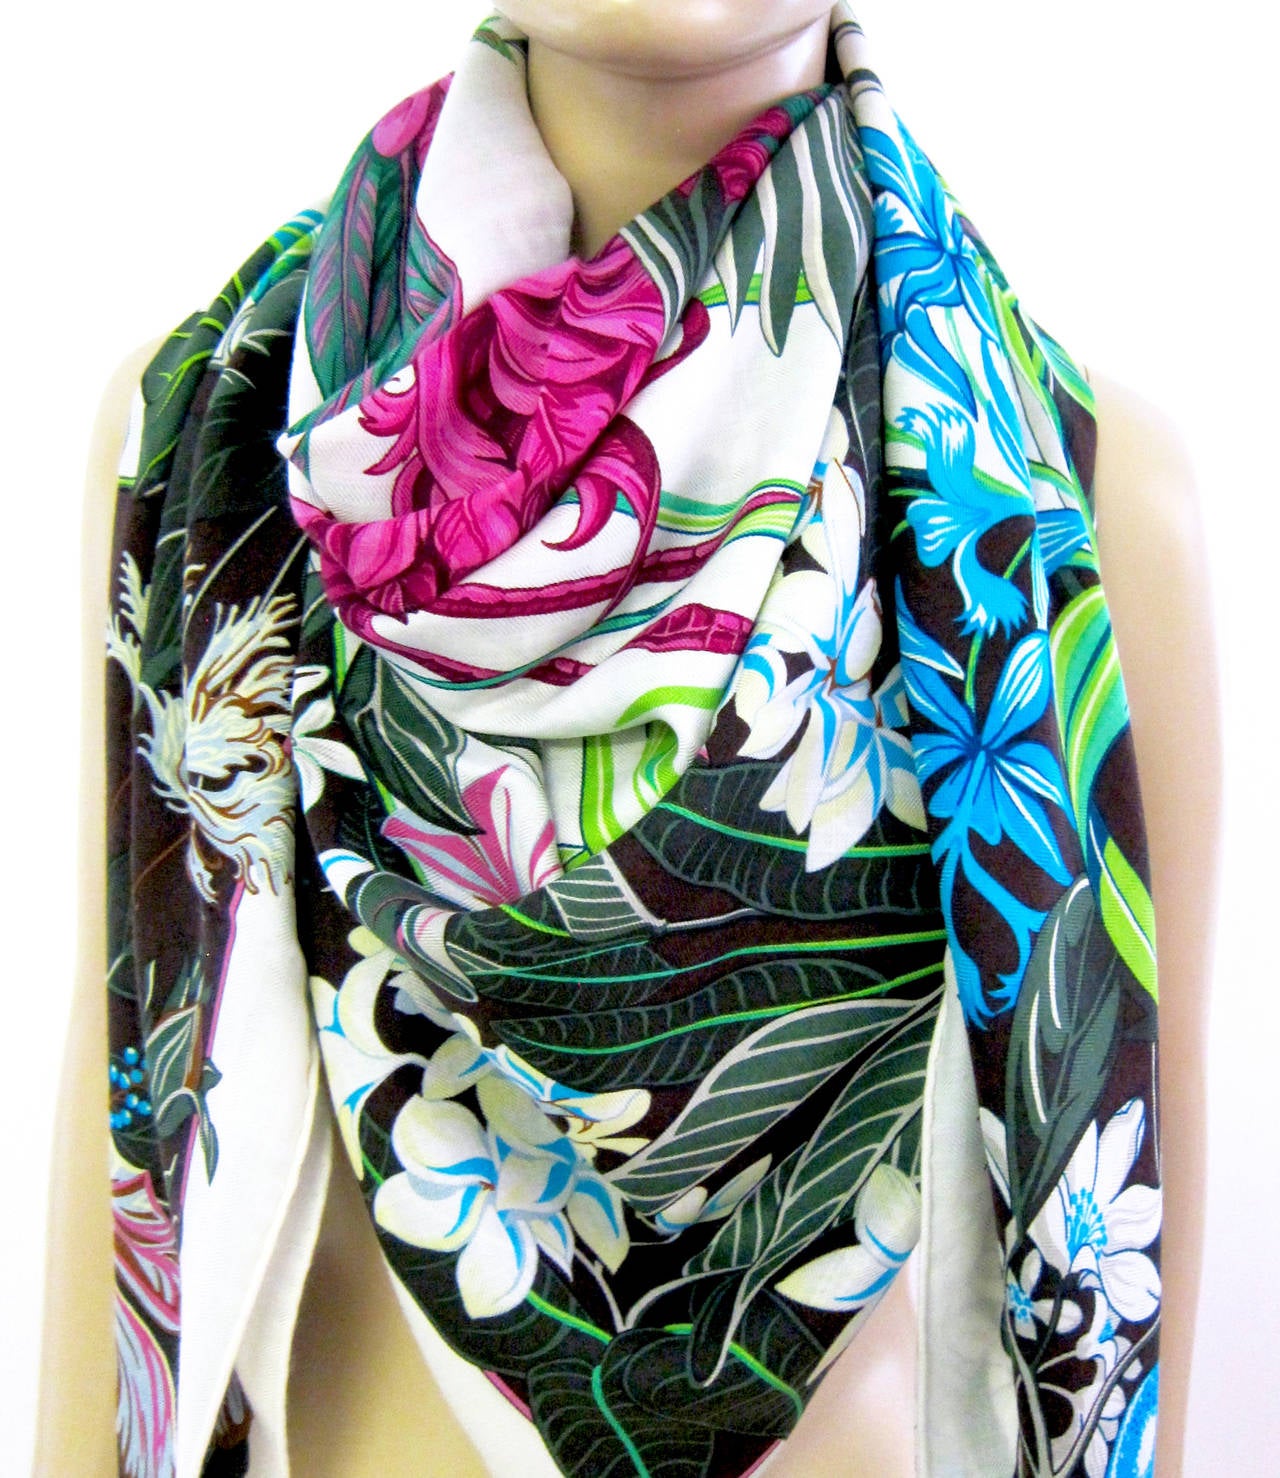 Hermes Flamingo Party Cashmere Silk GM Shawl 140cm 
One of our most successful shawls this spring
Sold out almost everywhere
Brand new in box coming with Hermes box and Hermes ribbon
Colors: White, Fuchsia, Turquoise, Greens, Blues,